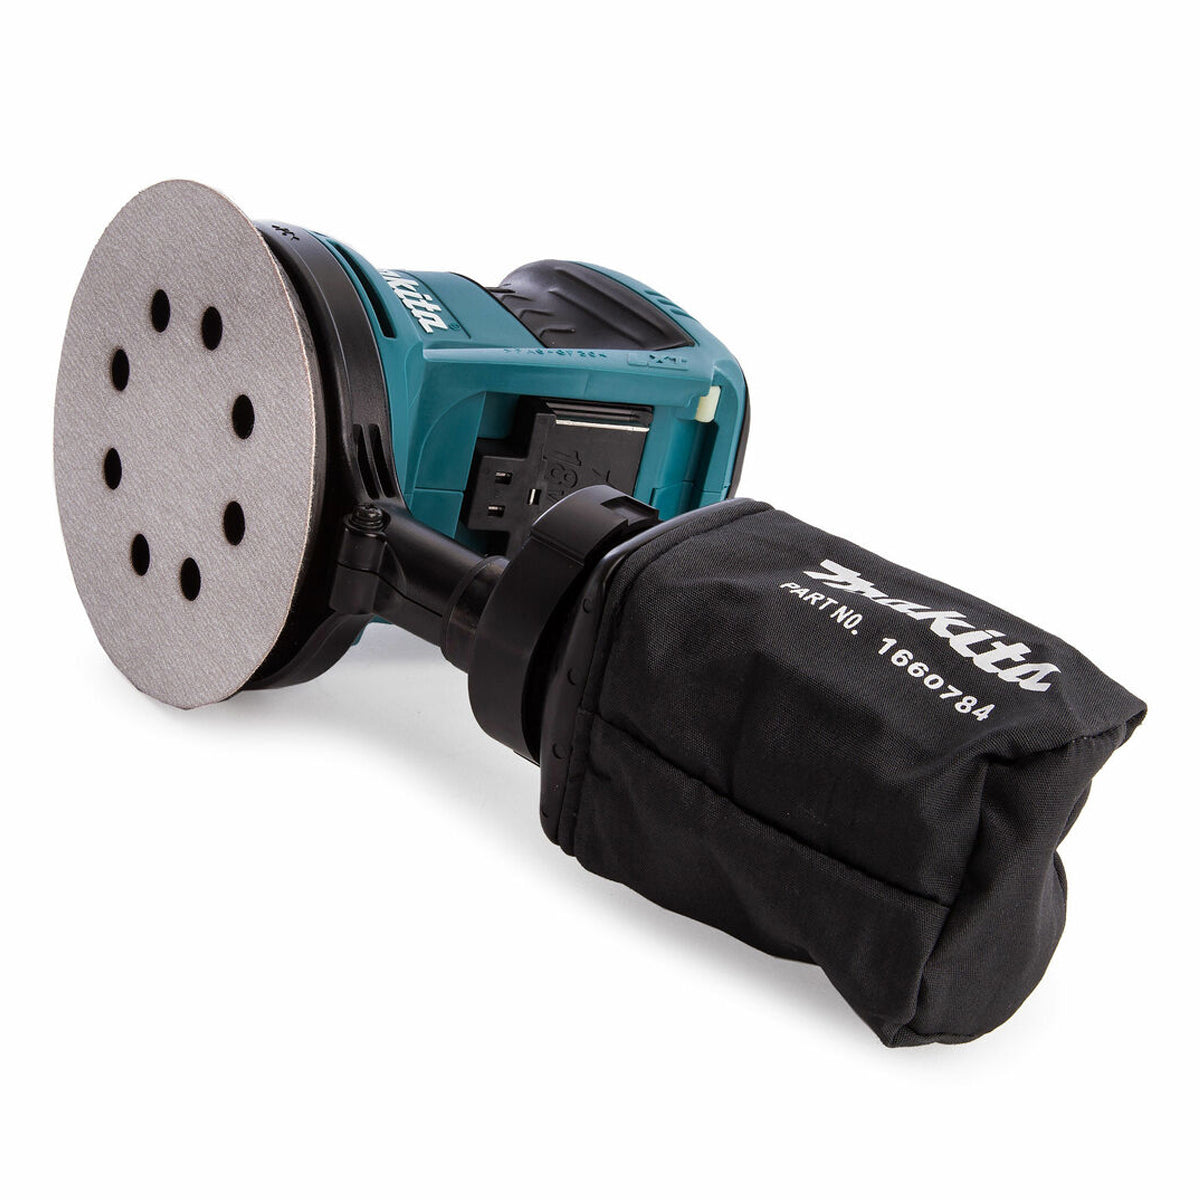 Makita DBO180Z 18V 125mm Sander with 1 x 5.0Ah Battery & Charger in Case